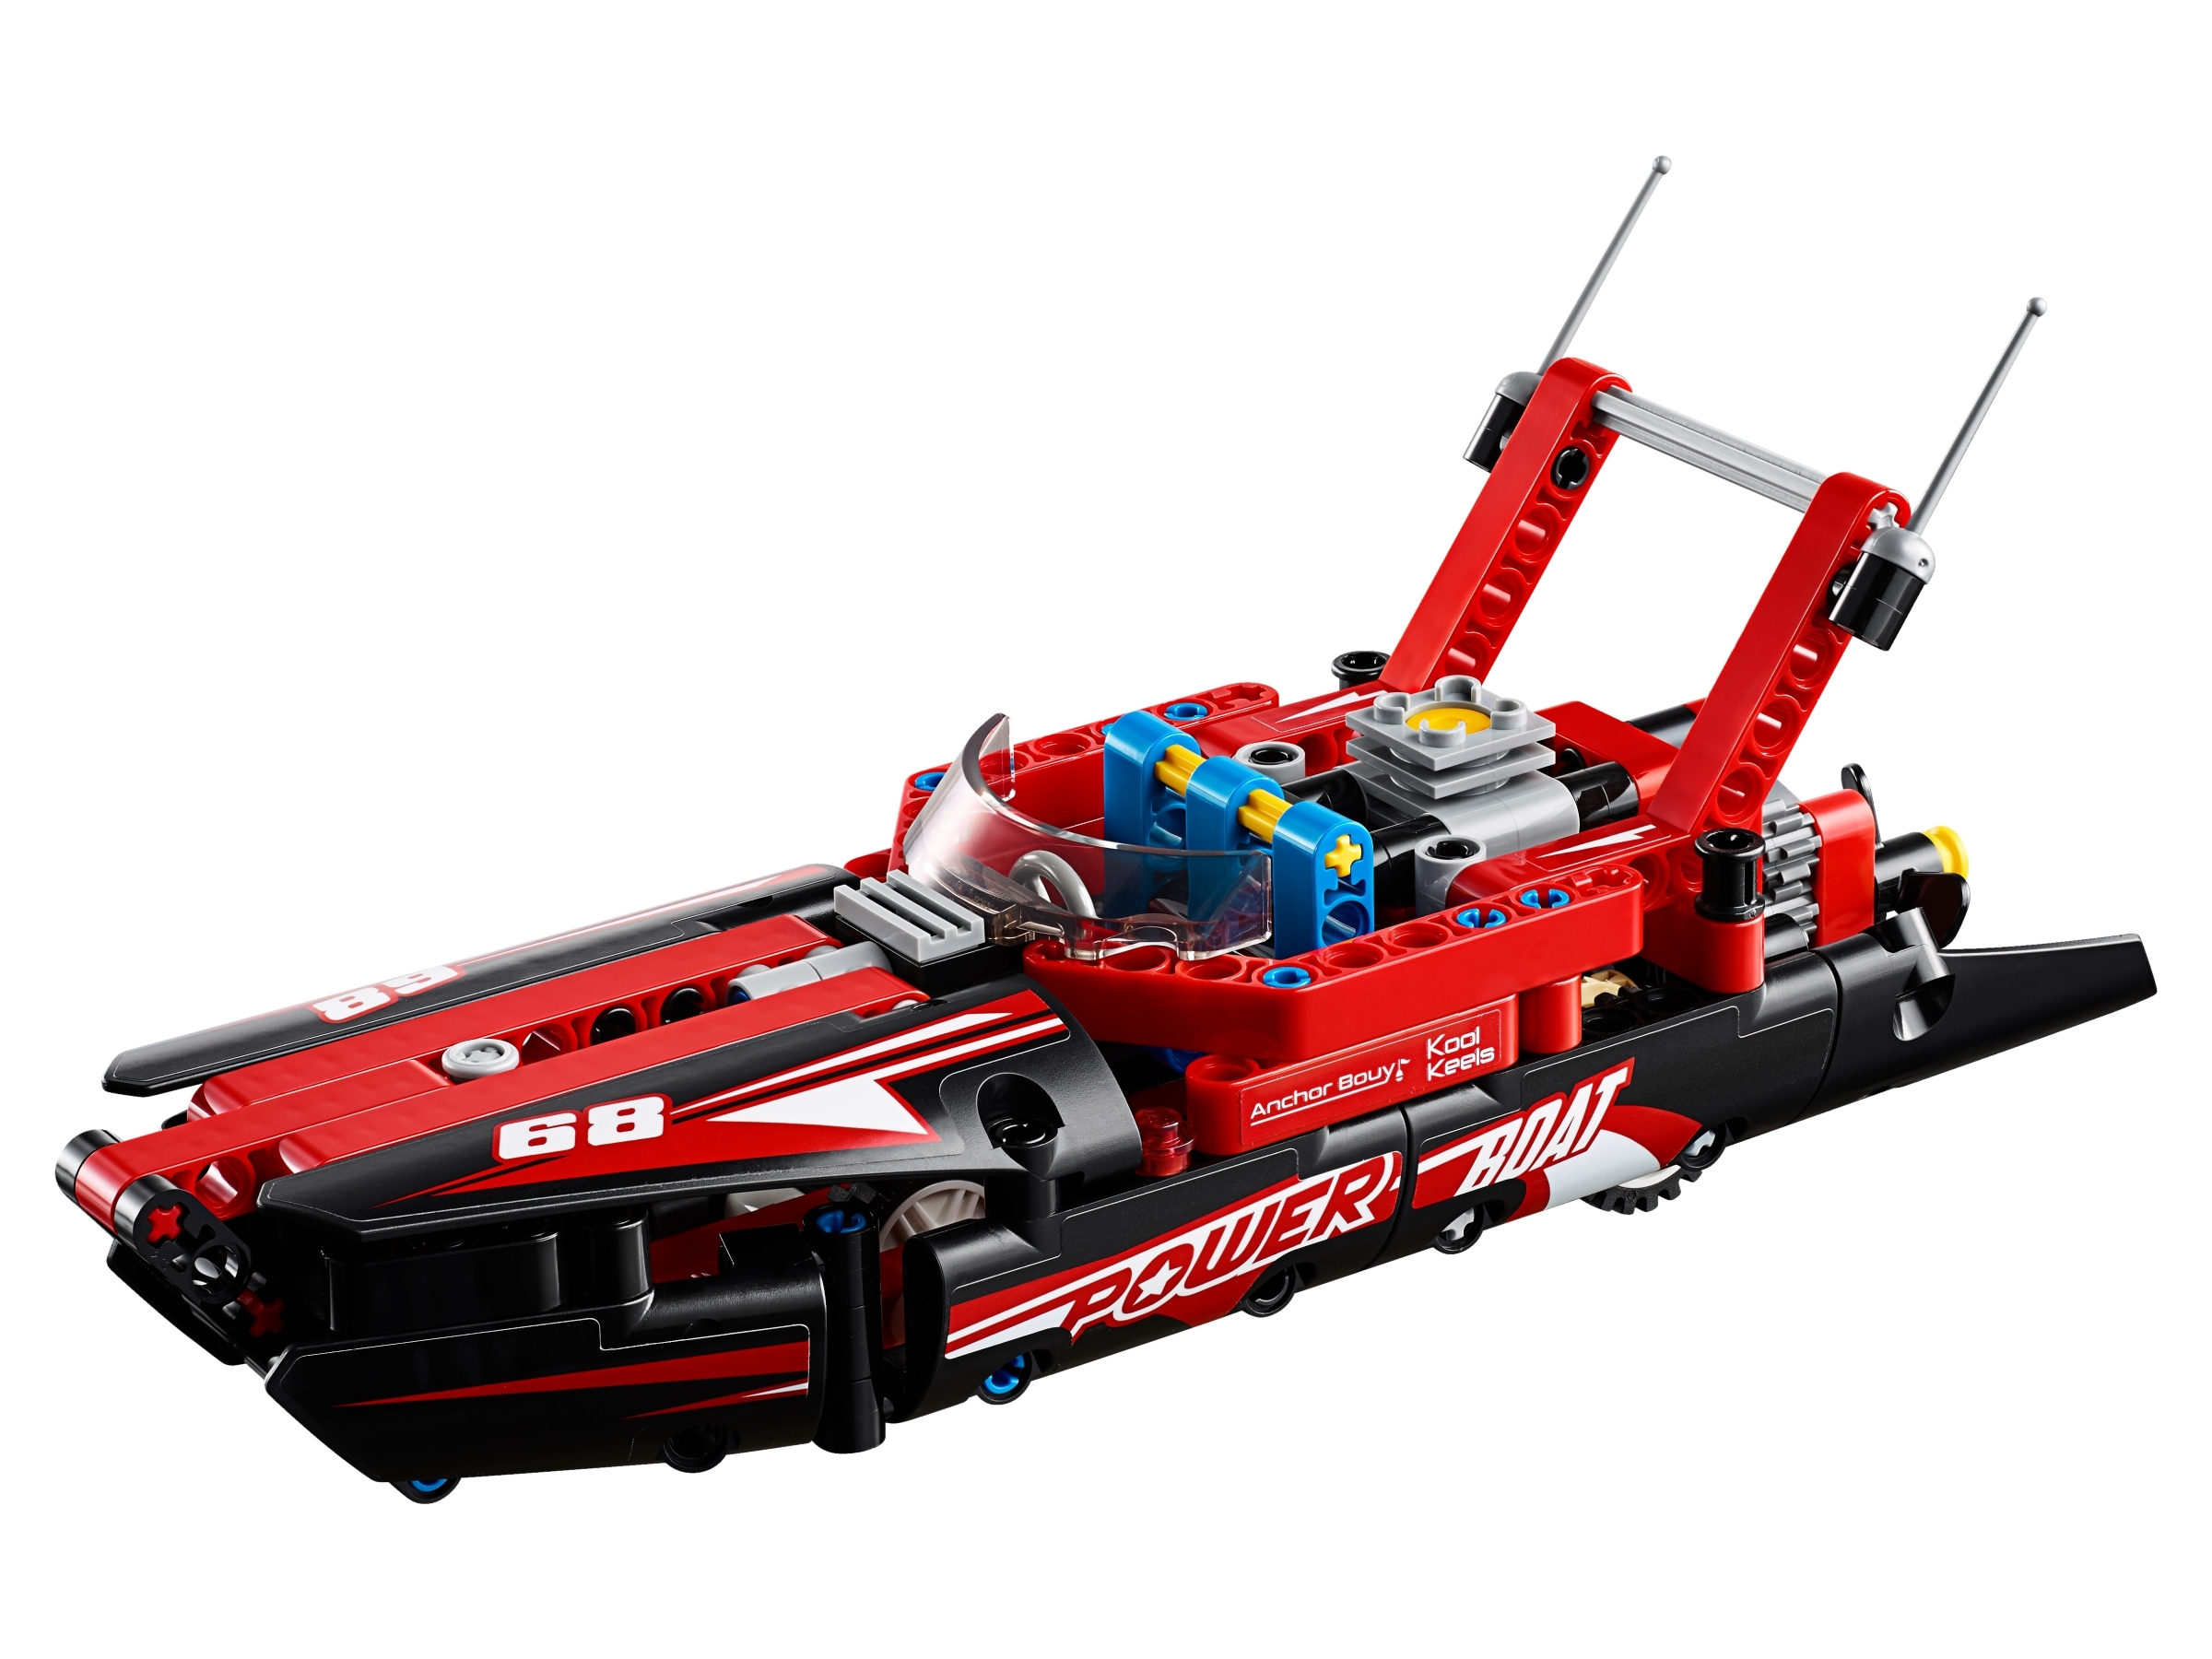 Power Boat 42089 | Technic™ | Buy online at the Official LEGO® Shop US